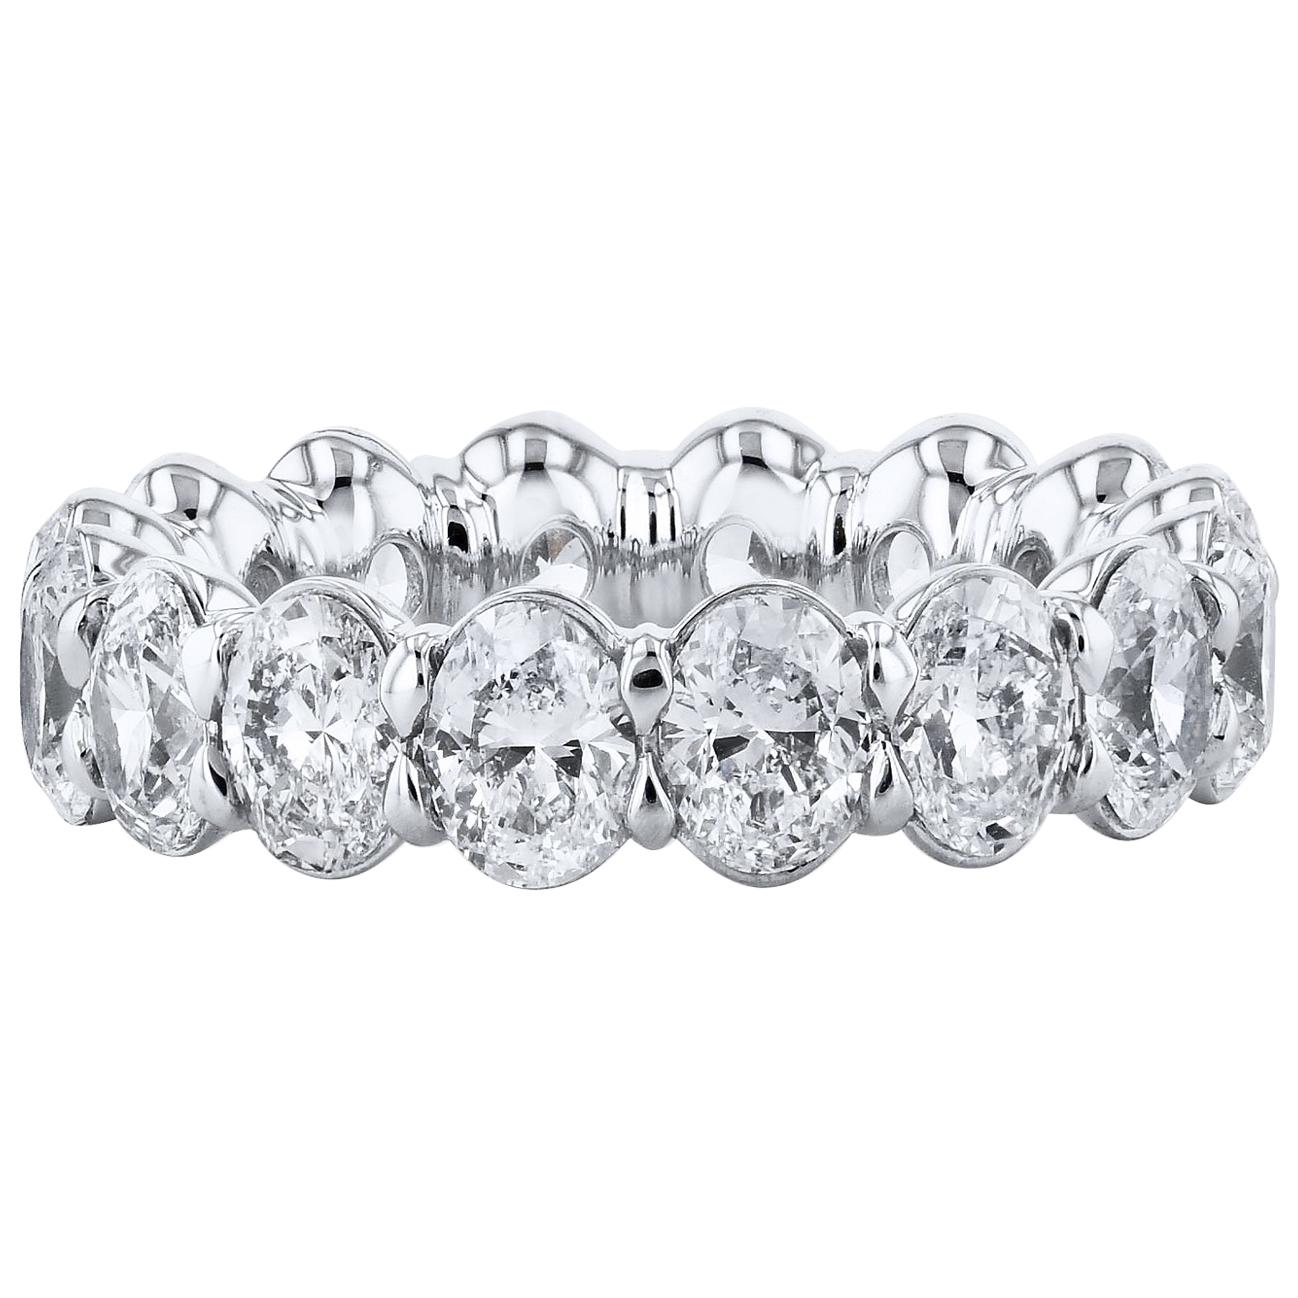 5.01 CT Total Weight Oval Diamond Eternity Band Buttercup Setting Ring Size 6.5 For Sale